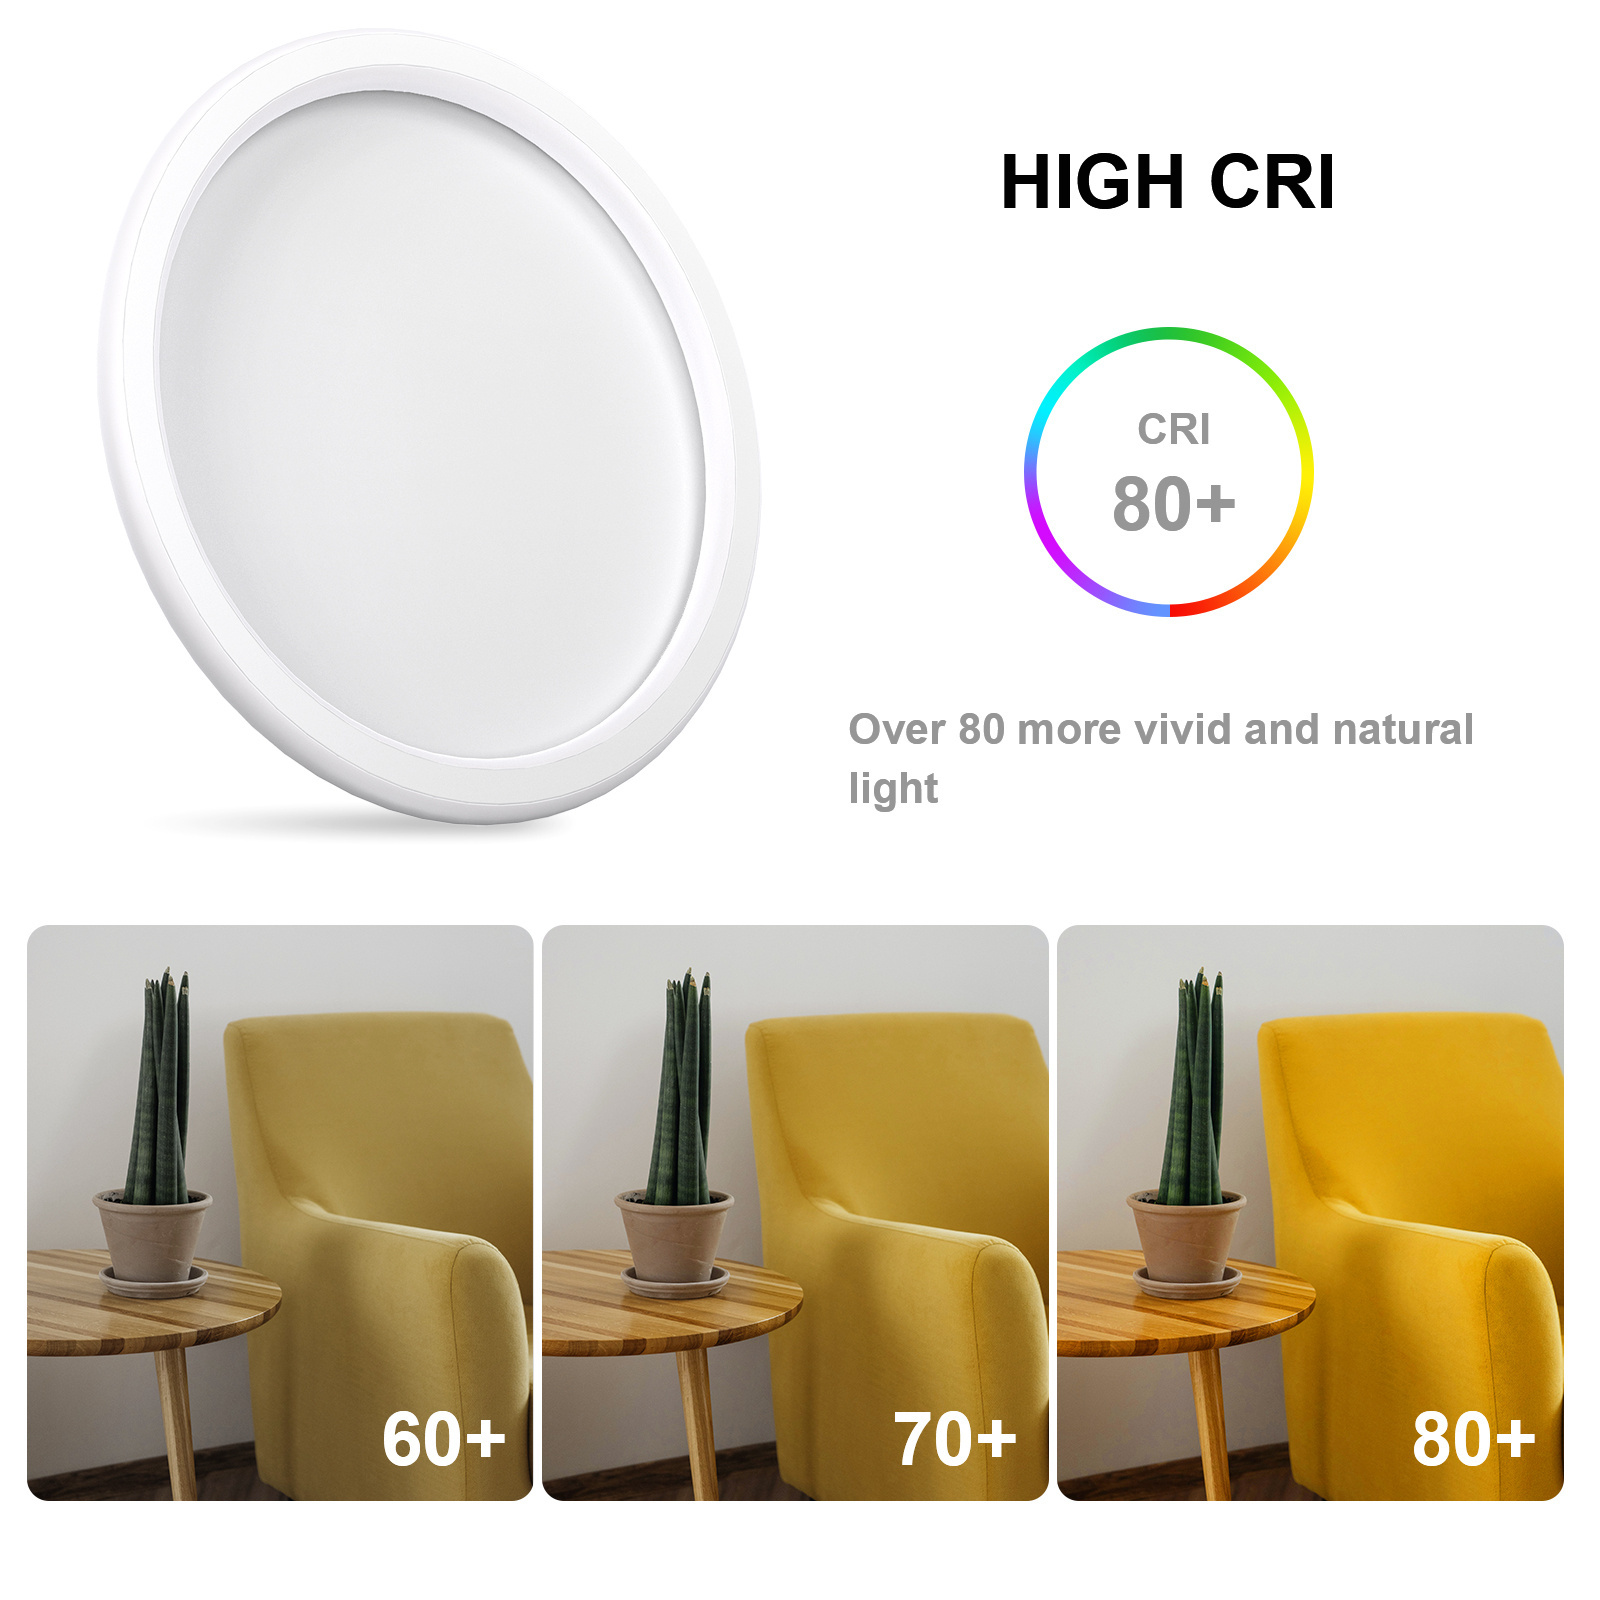 Flush Mount LED Ceiling Light,Cheeroll 12 Inch Ceiling Lighting Fixture 45W 3000K Warm Round Ceiling Light,for Bathroom, Kitchen, Bedroom, Living Room,Garage Non Dimmable